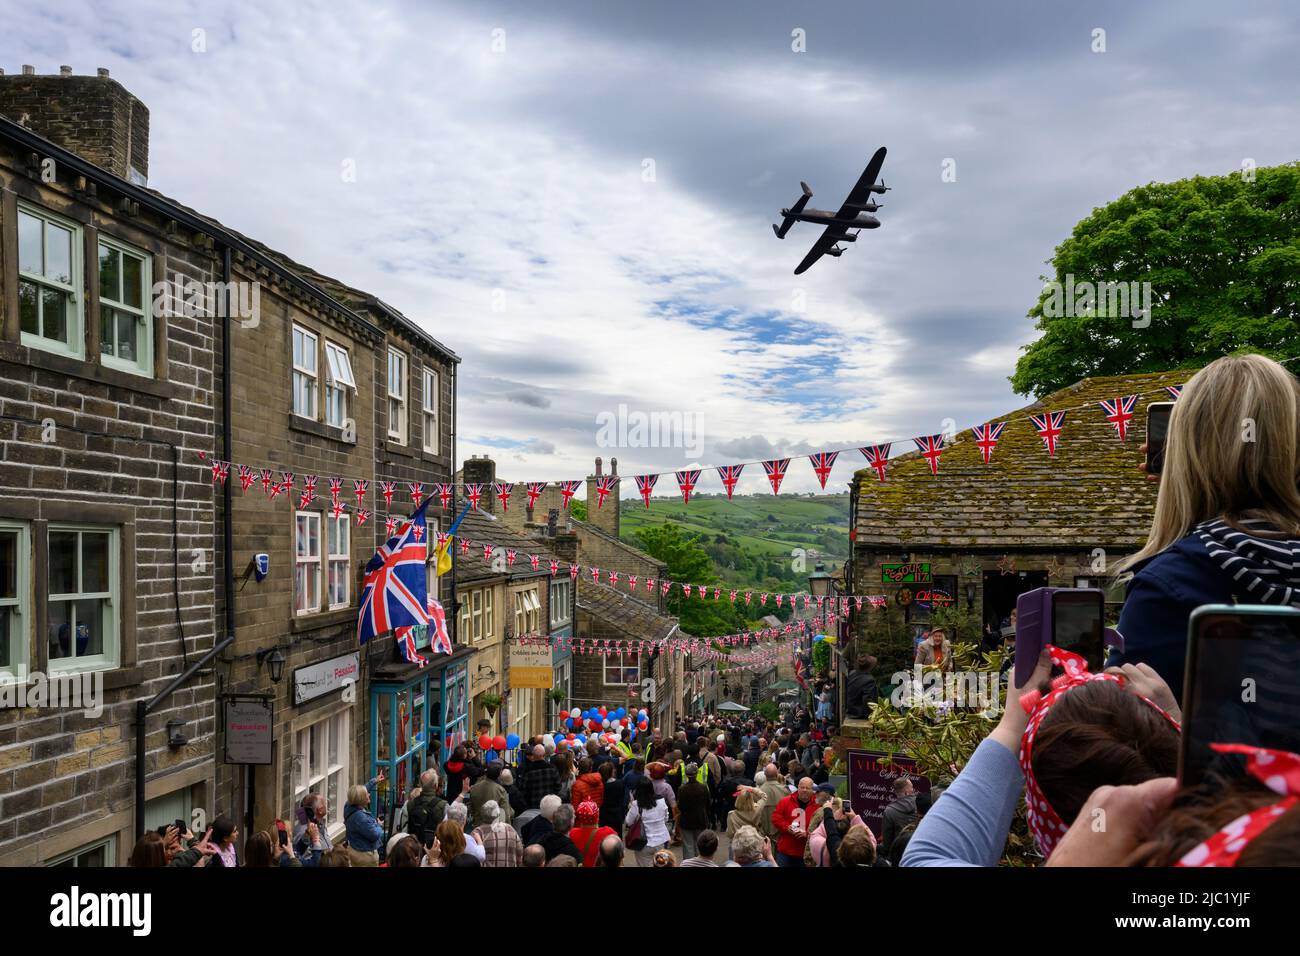 Haworth 1940's weekend (busy crowded Main Street decorated in Union Jacks, watching historic aeroplane, annual event) - West Yorkshire, England, UK. Stock Photo